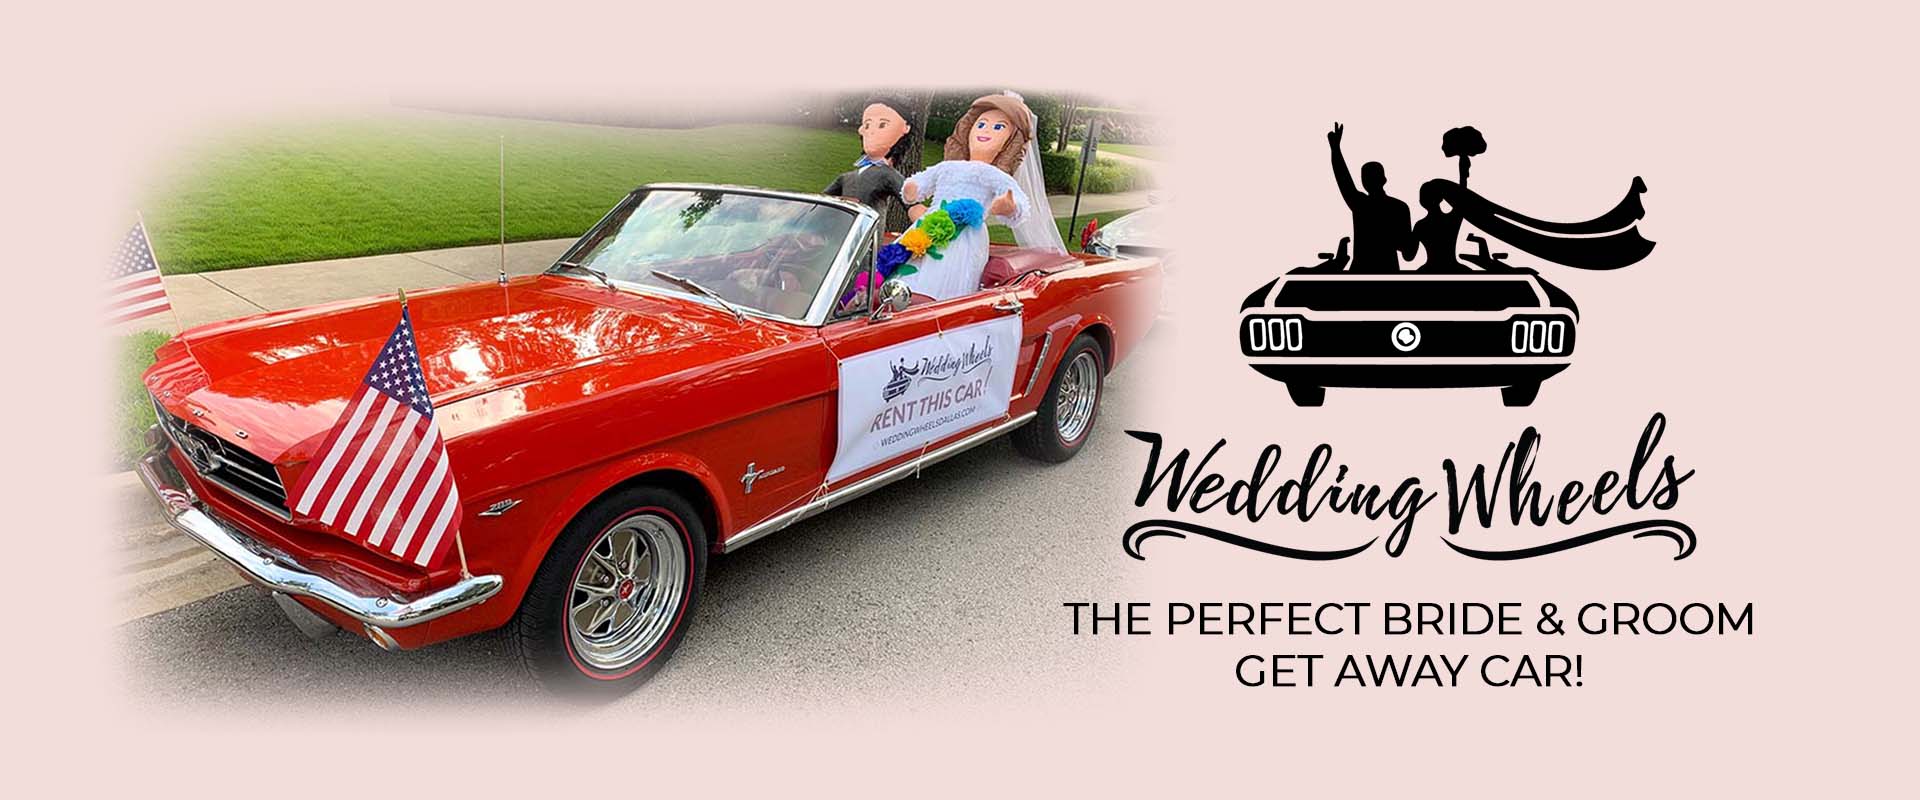 wedding wheels the perfect bride and groom get away car graphic with red mustang car pinata bride and groom convertible classic car